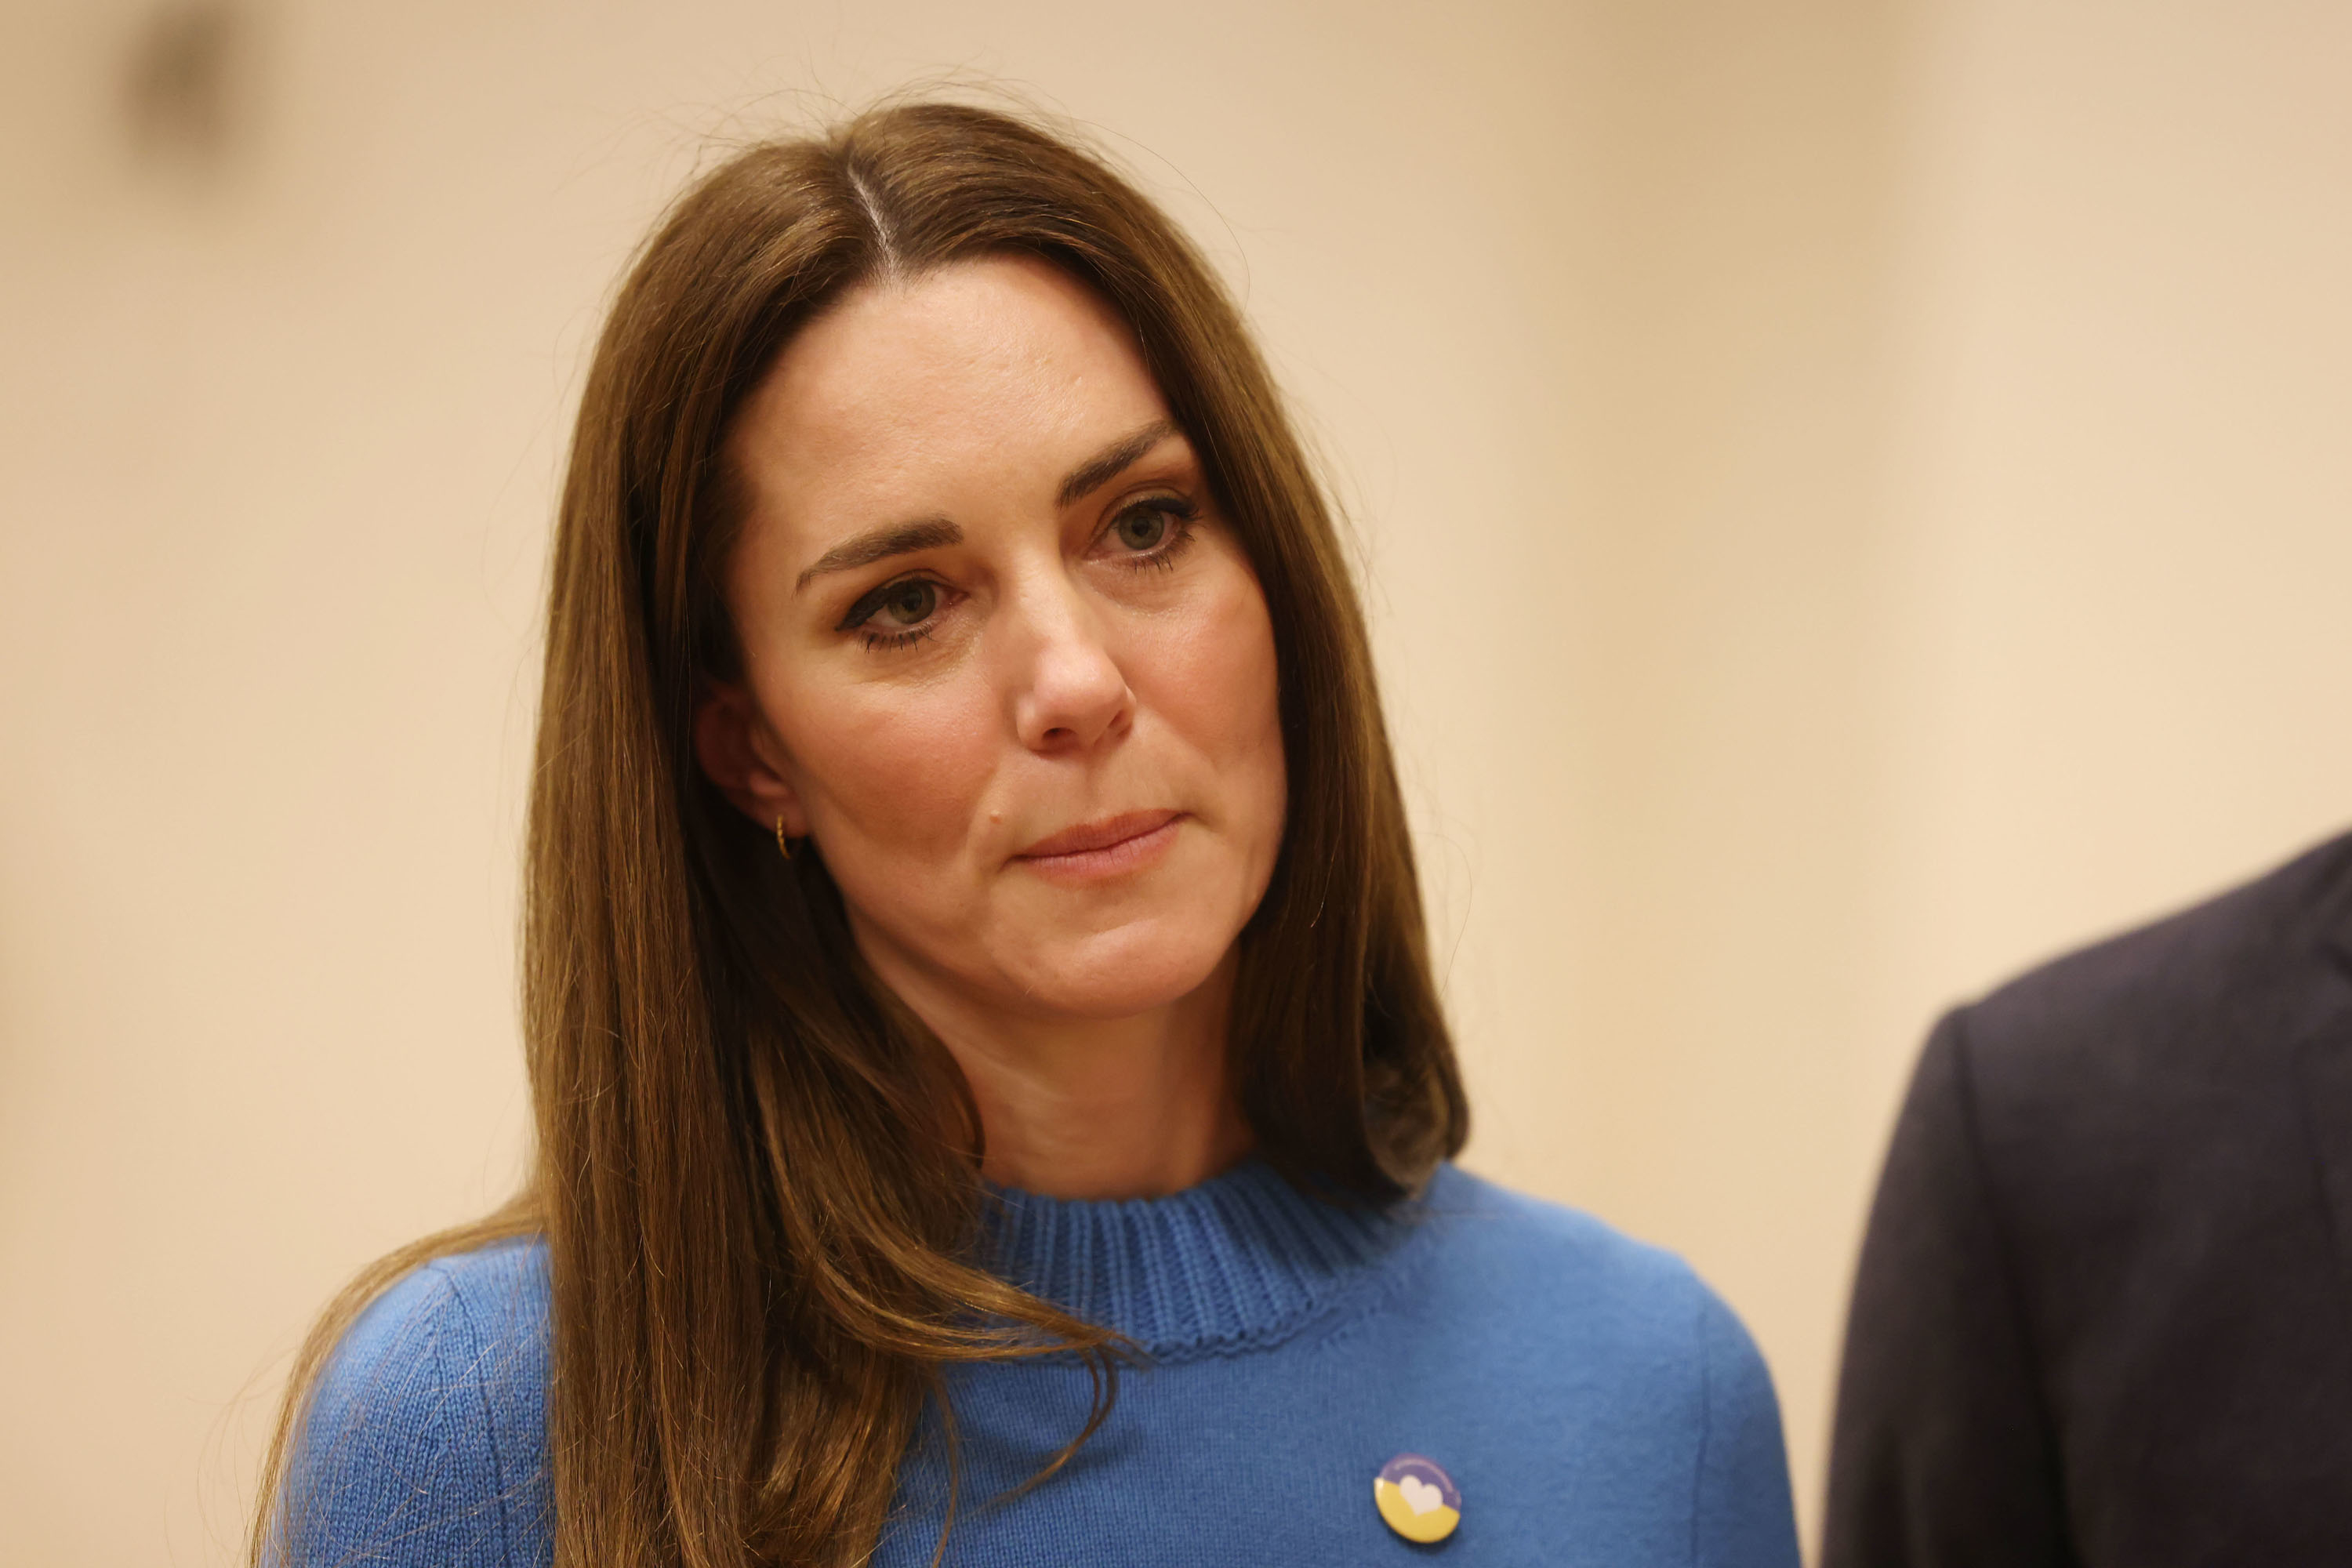 Kate Middleton in a sweater with a small pin